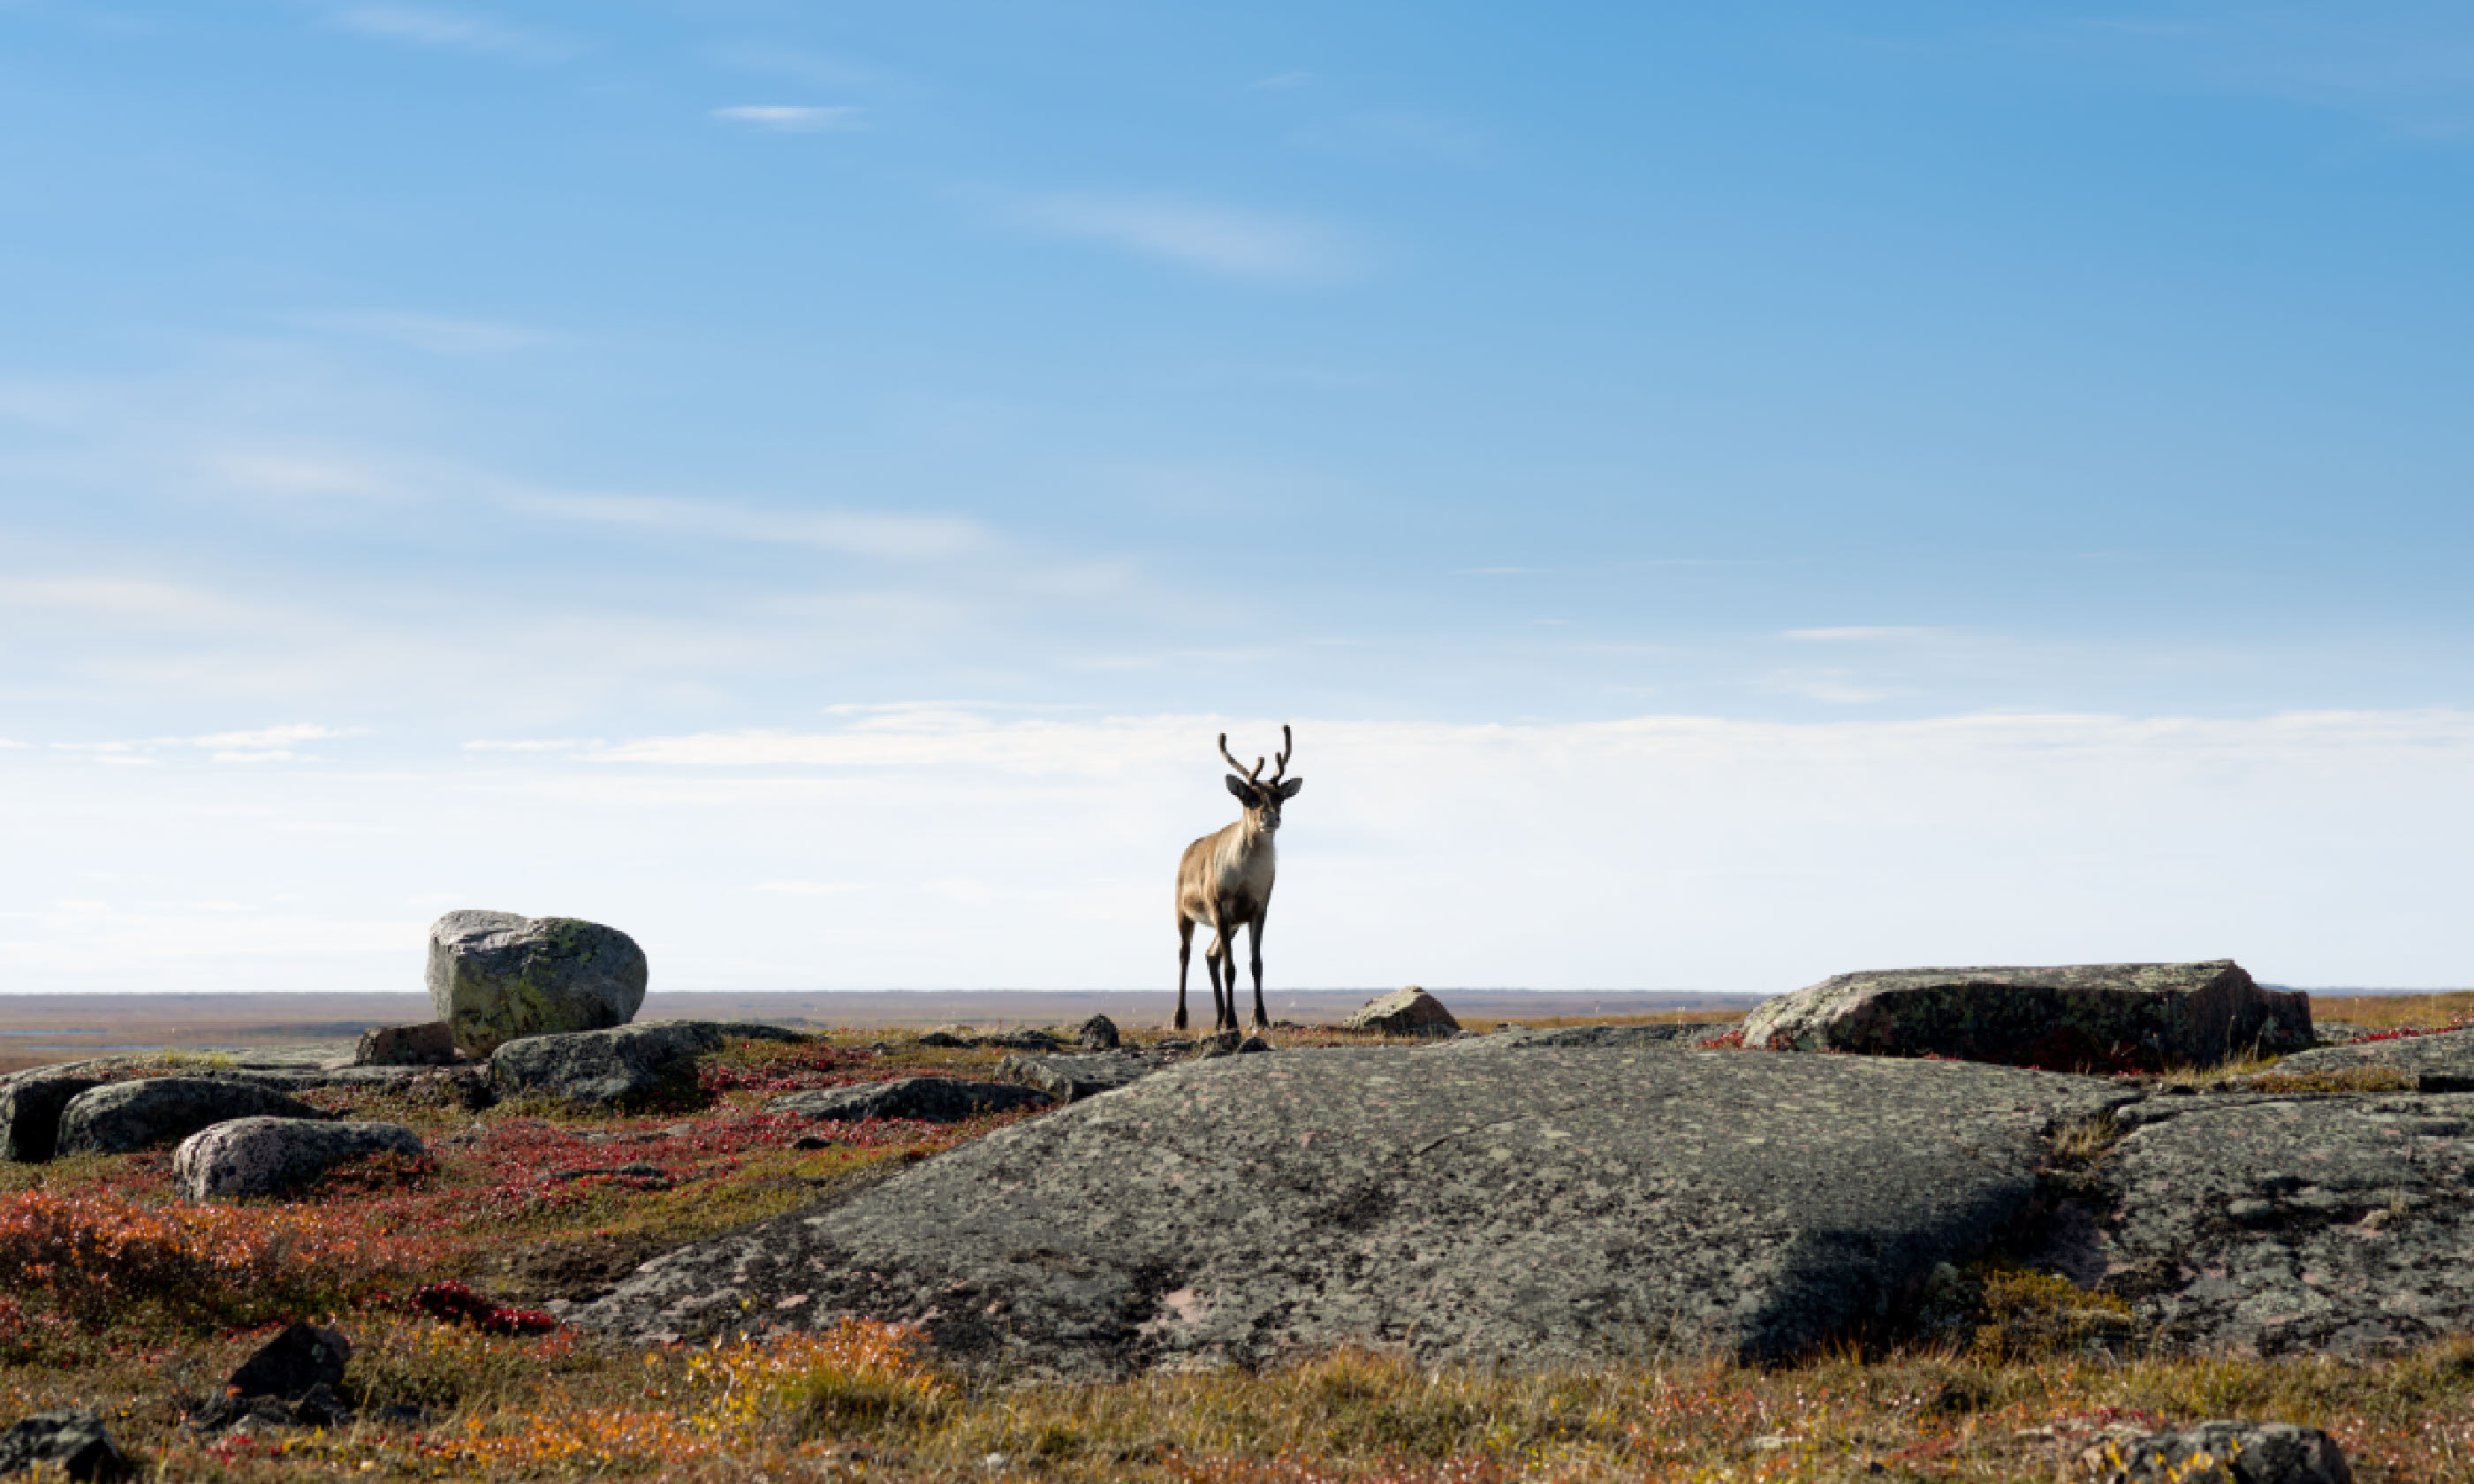  Lone Caribou on the Arctic Tundra (Shutterstock)